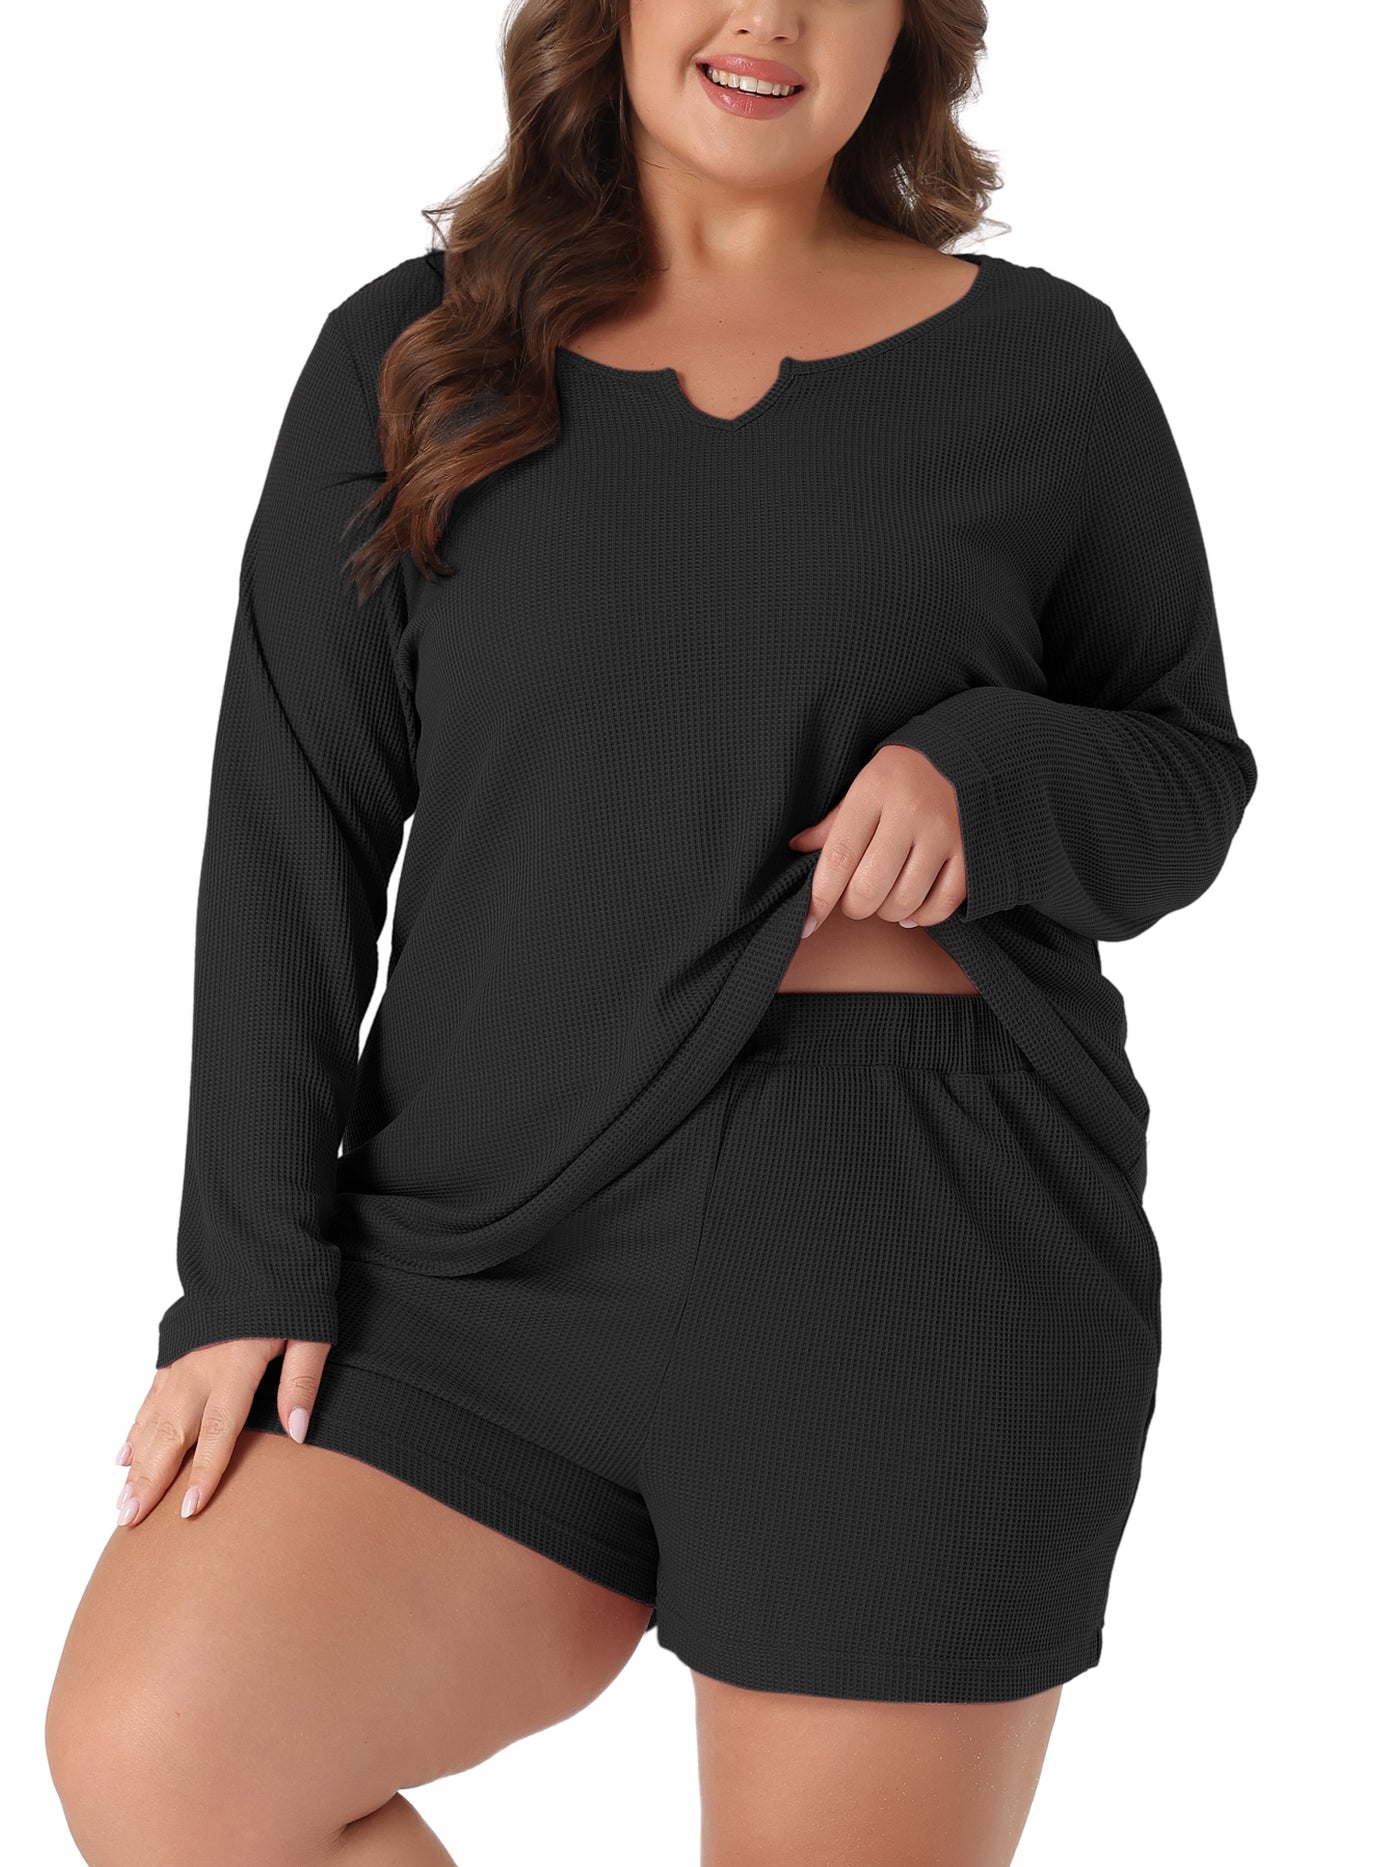 Bublédon Plus Size Loungewear for Women Waffle 2 Piece Long Sleeved Tops and Shorts Pajama Sweatsuits Sets